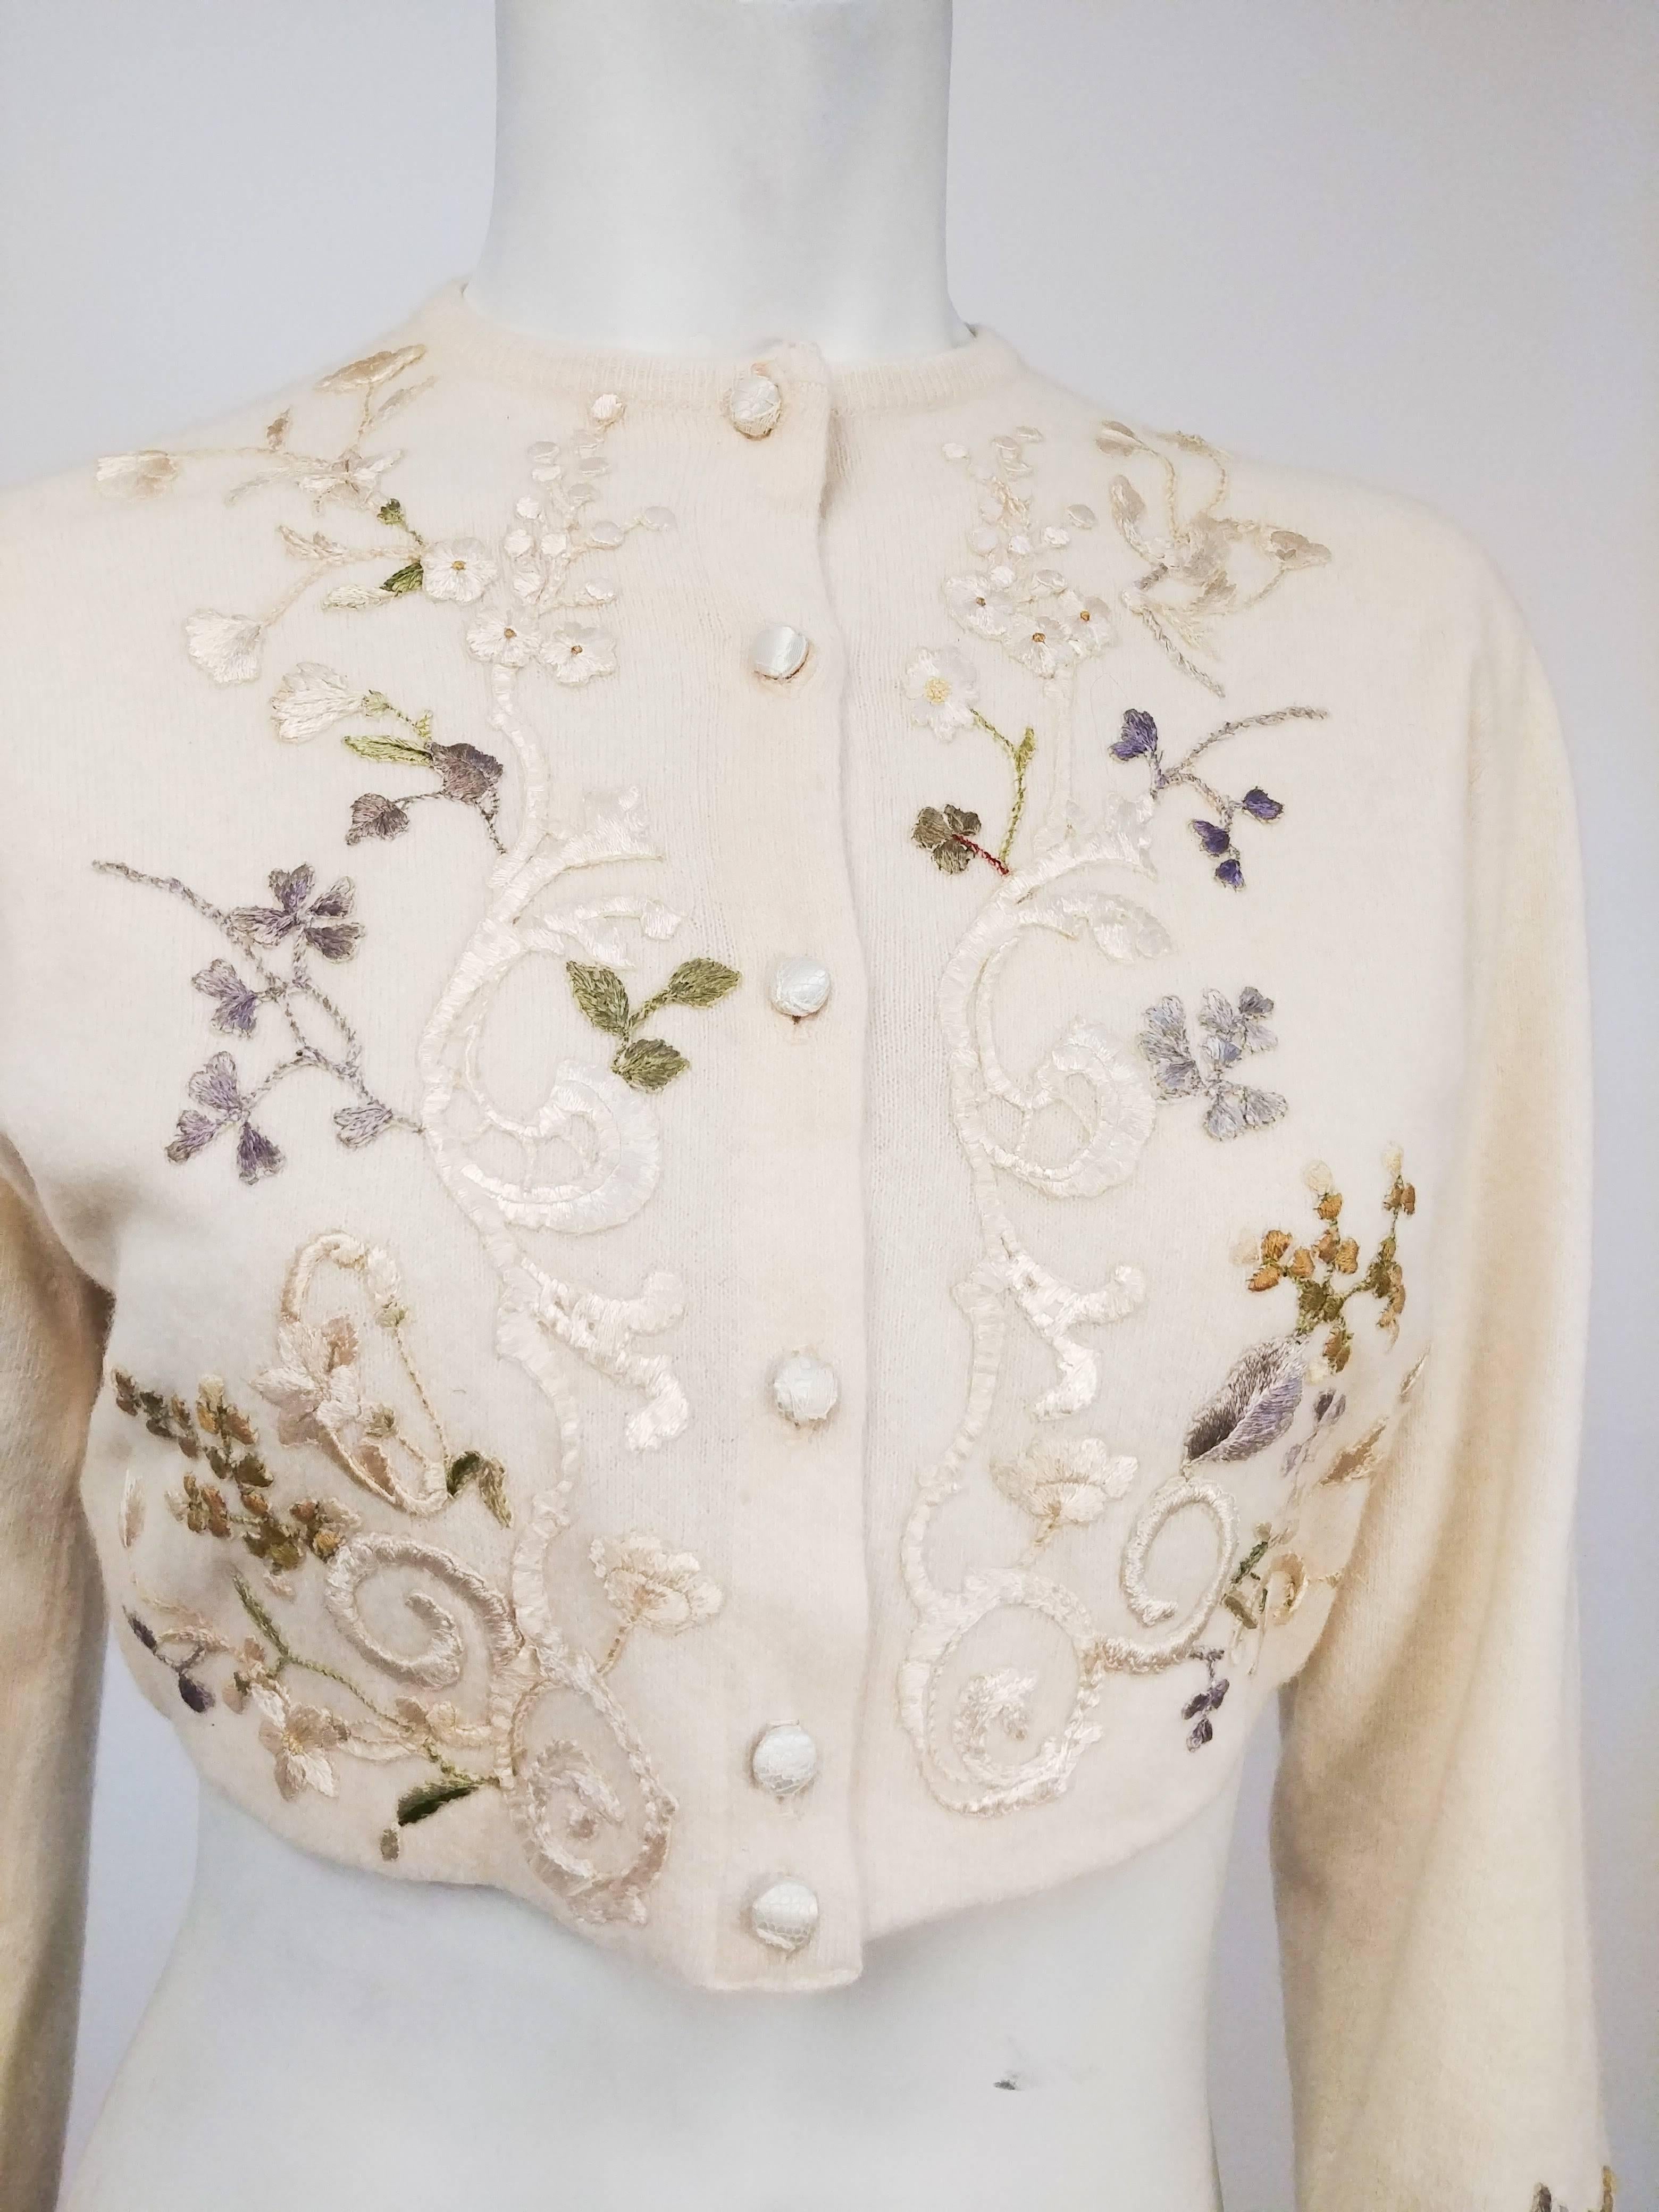 1950s Helen Bond Carruthers Embroidered Applique Cardigan Sweater. Cropped cashmere ivory sweater by Dalton customized by designer Helen Bond Carruthers, known for one-of-a-kind artistic embellished high-end sweaters using vintage trims and